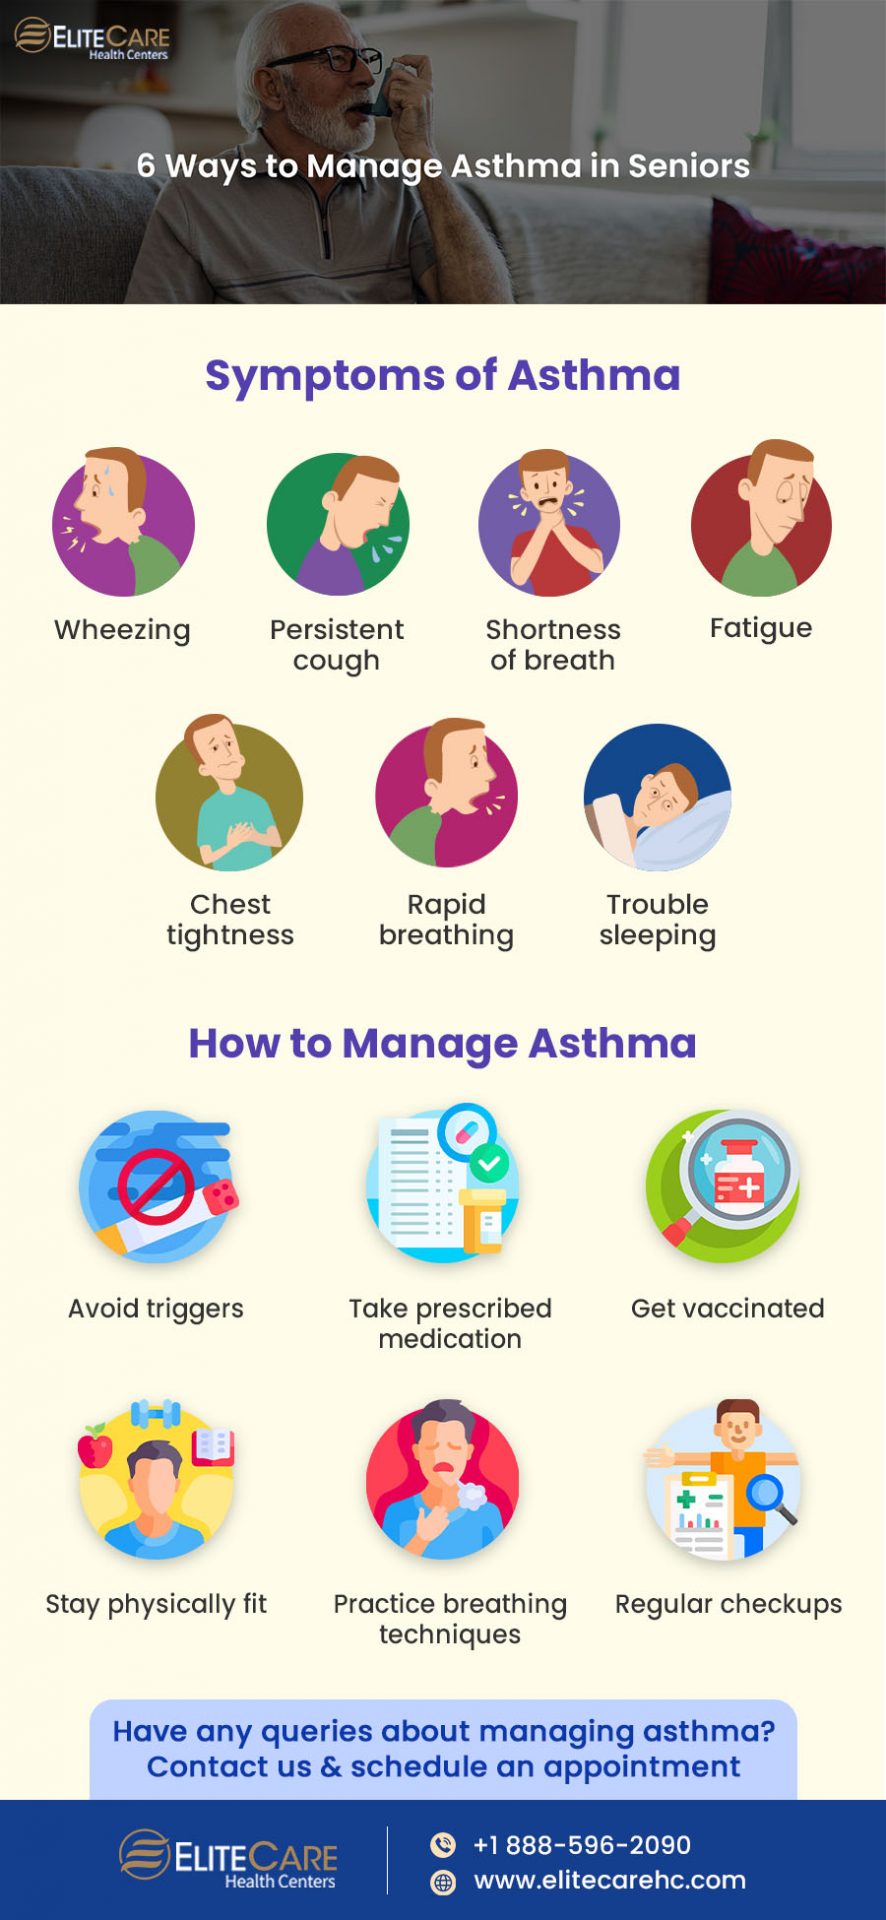 6 Ways to Manage Asthma in Seniors | Infographic